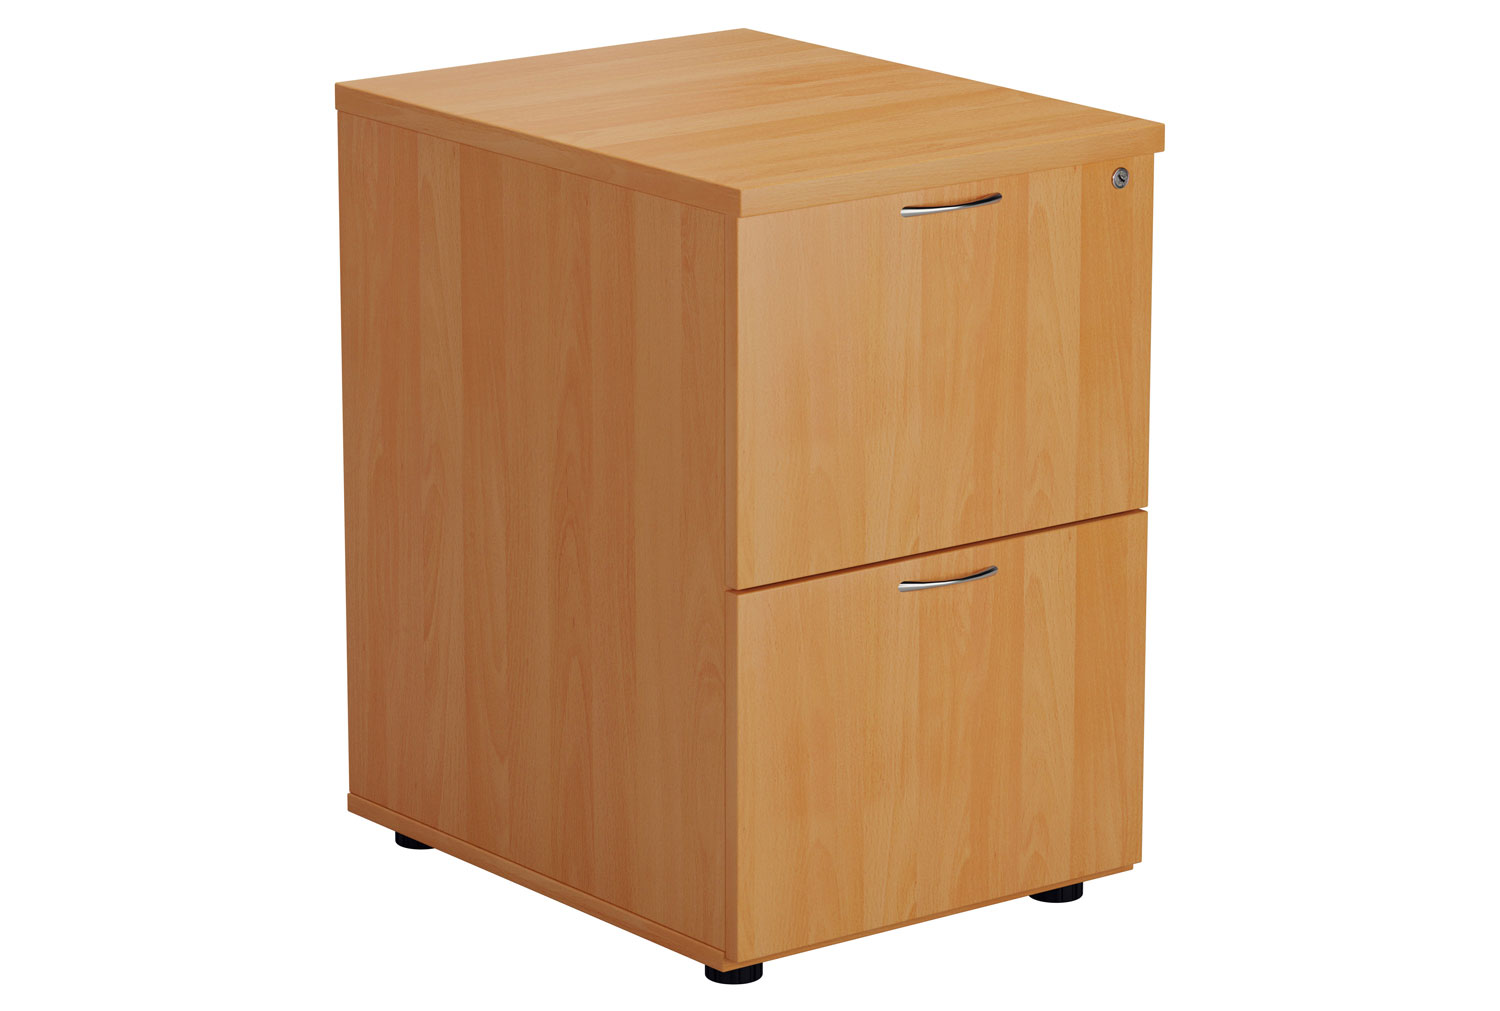 Proteus Wooden Filing Cabinet, 2 Drawer - 47wx60dx71h (cm), Beech, Express Delivery